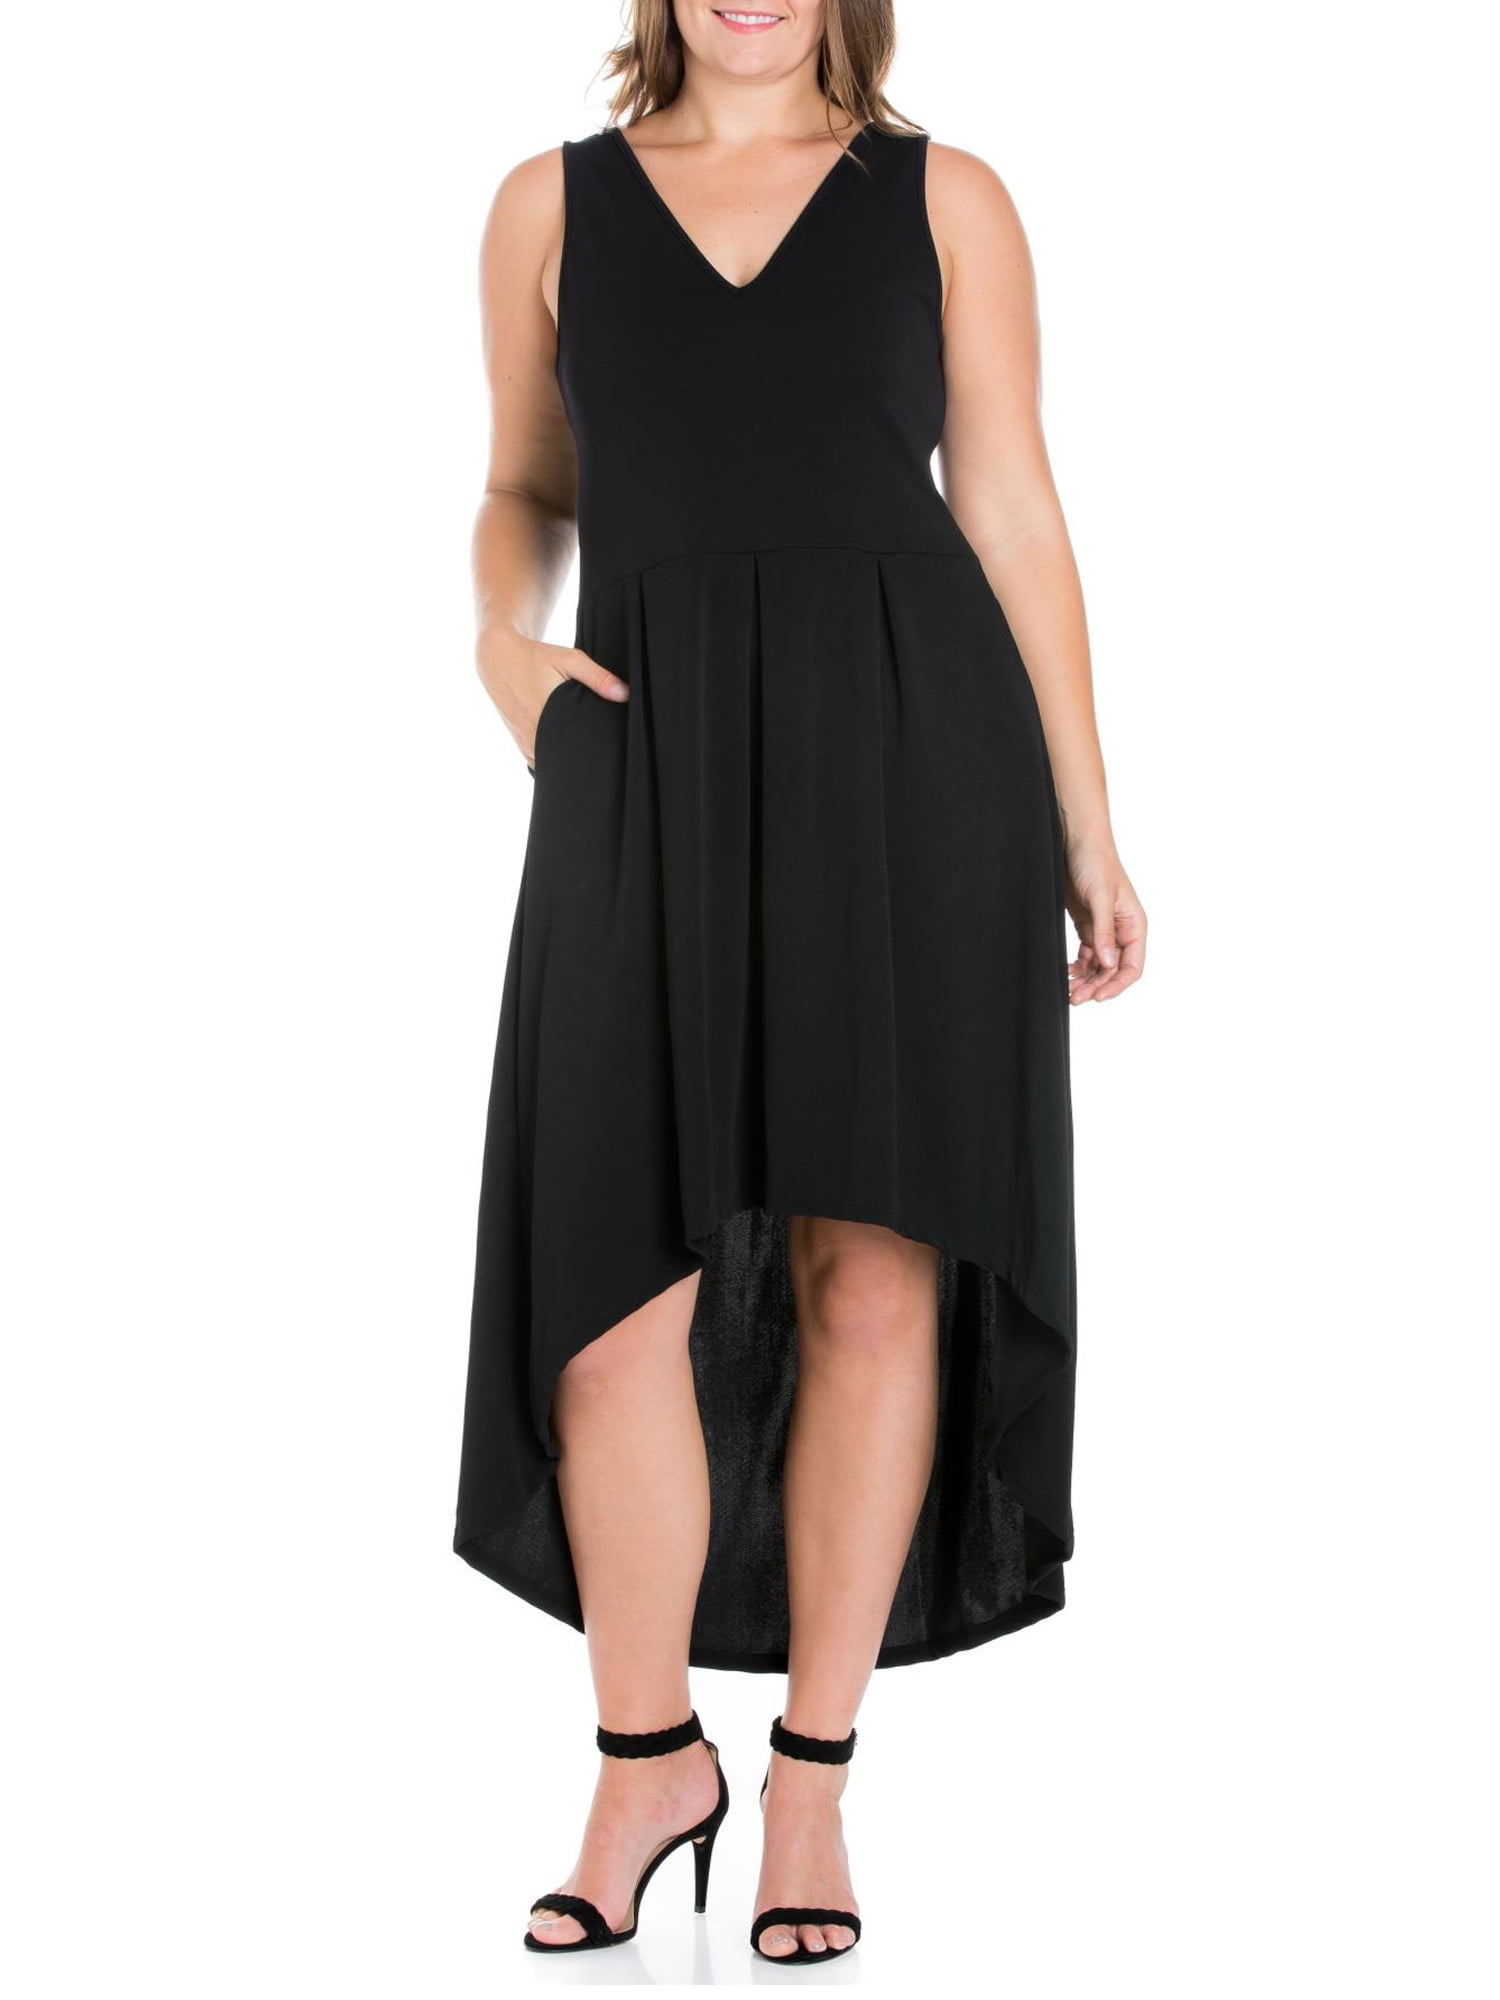 24seven Comfort Apparel Plus Size High Low Party Dress with